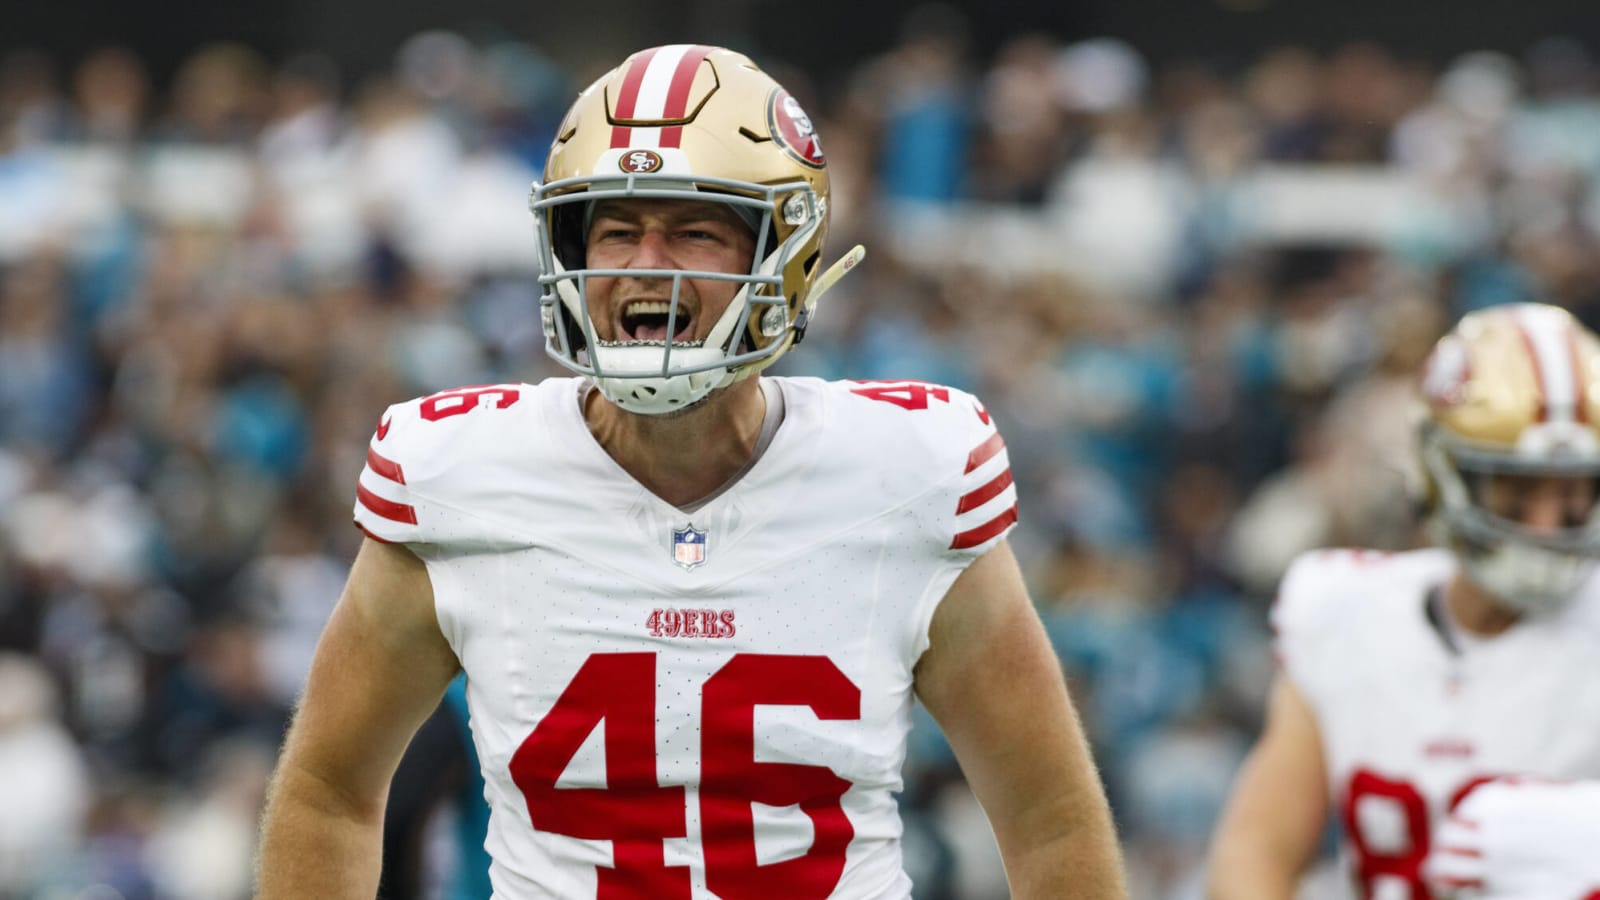 Watch: 'F***d around and found out' – 49ers’ Taybor Pepper aggressively hits back at DK Metcalf in ASL after big altercation during the game